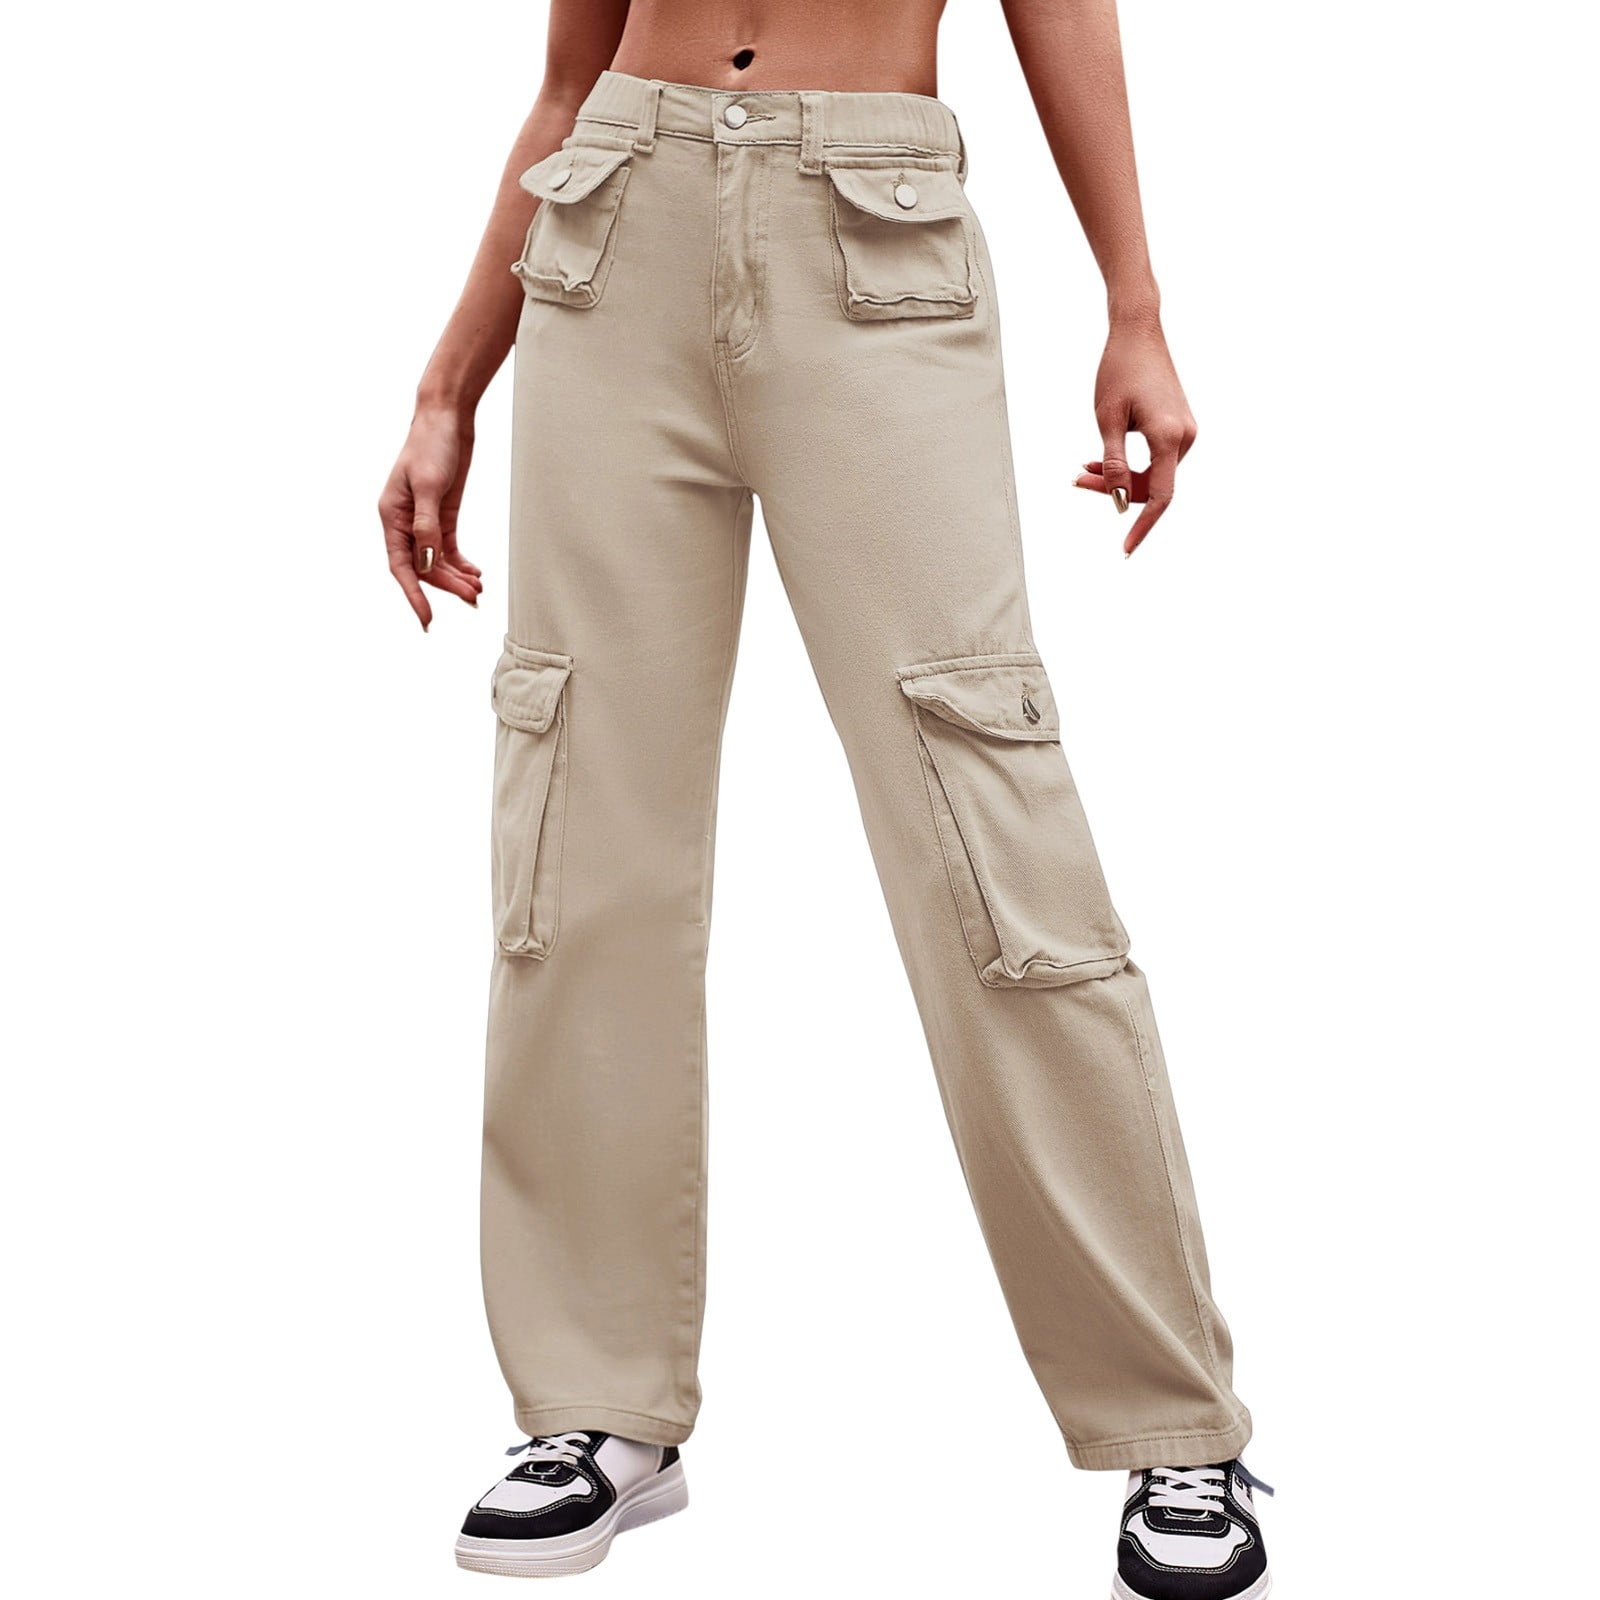 adviicd Womens Business Casual Pants For Work Casual Dresses For Women  Women's Summer Solid High Waist Wide Leg Trousers Office Work Pants Khaki XL